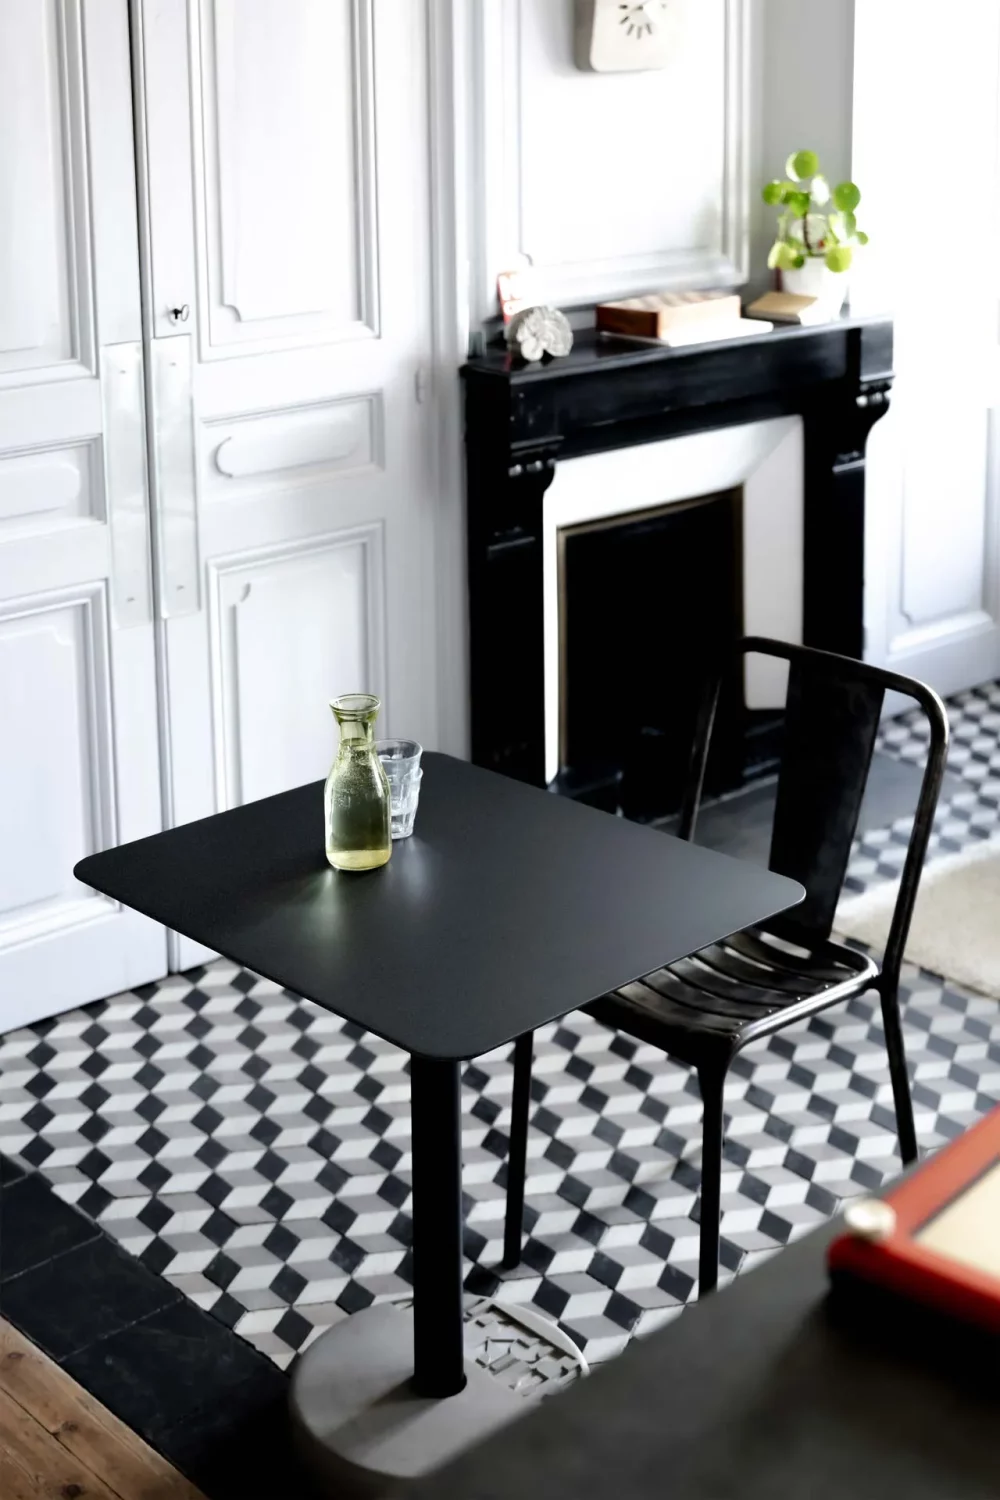 The Donut rectangular table next to a black marble fireplace